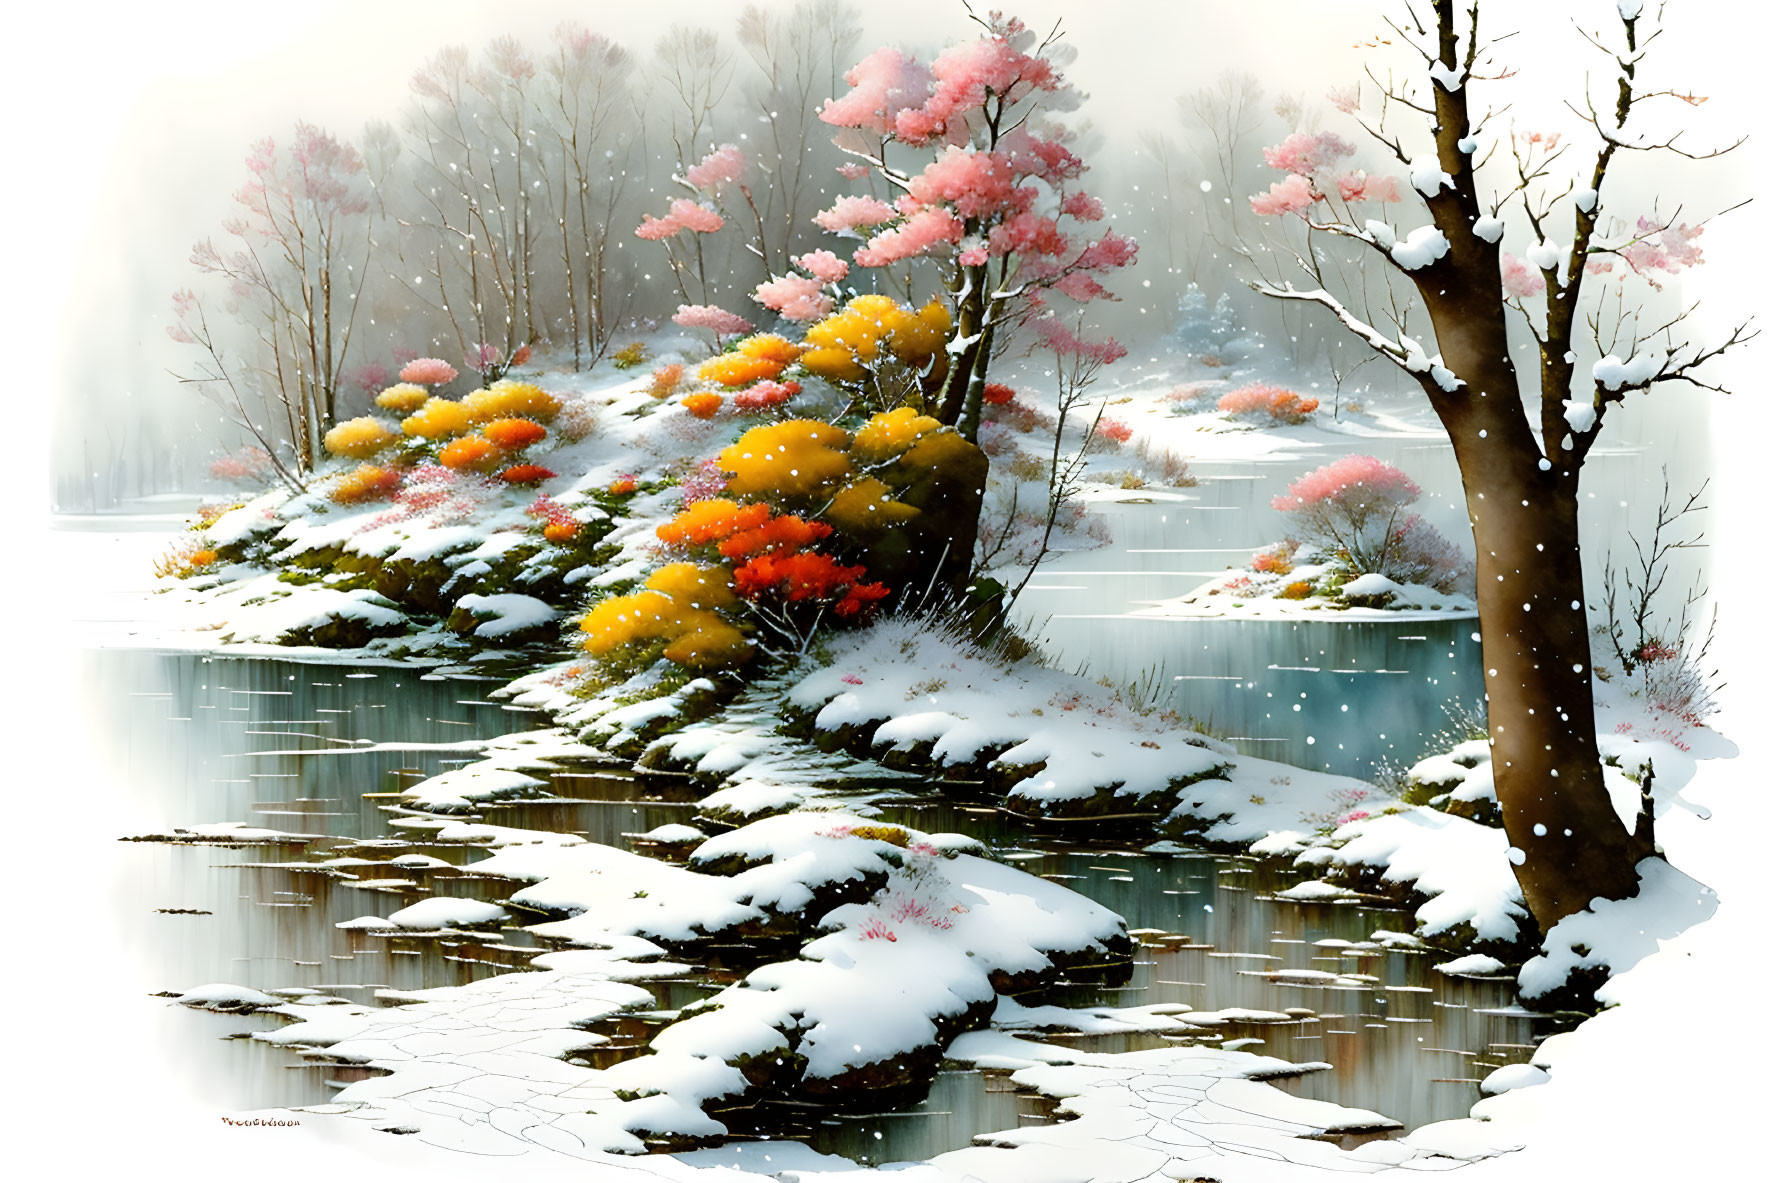 Snow-covered winter landscape with flowering shrubs, bare trees, and reflective water.